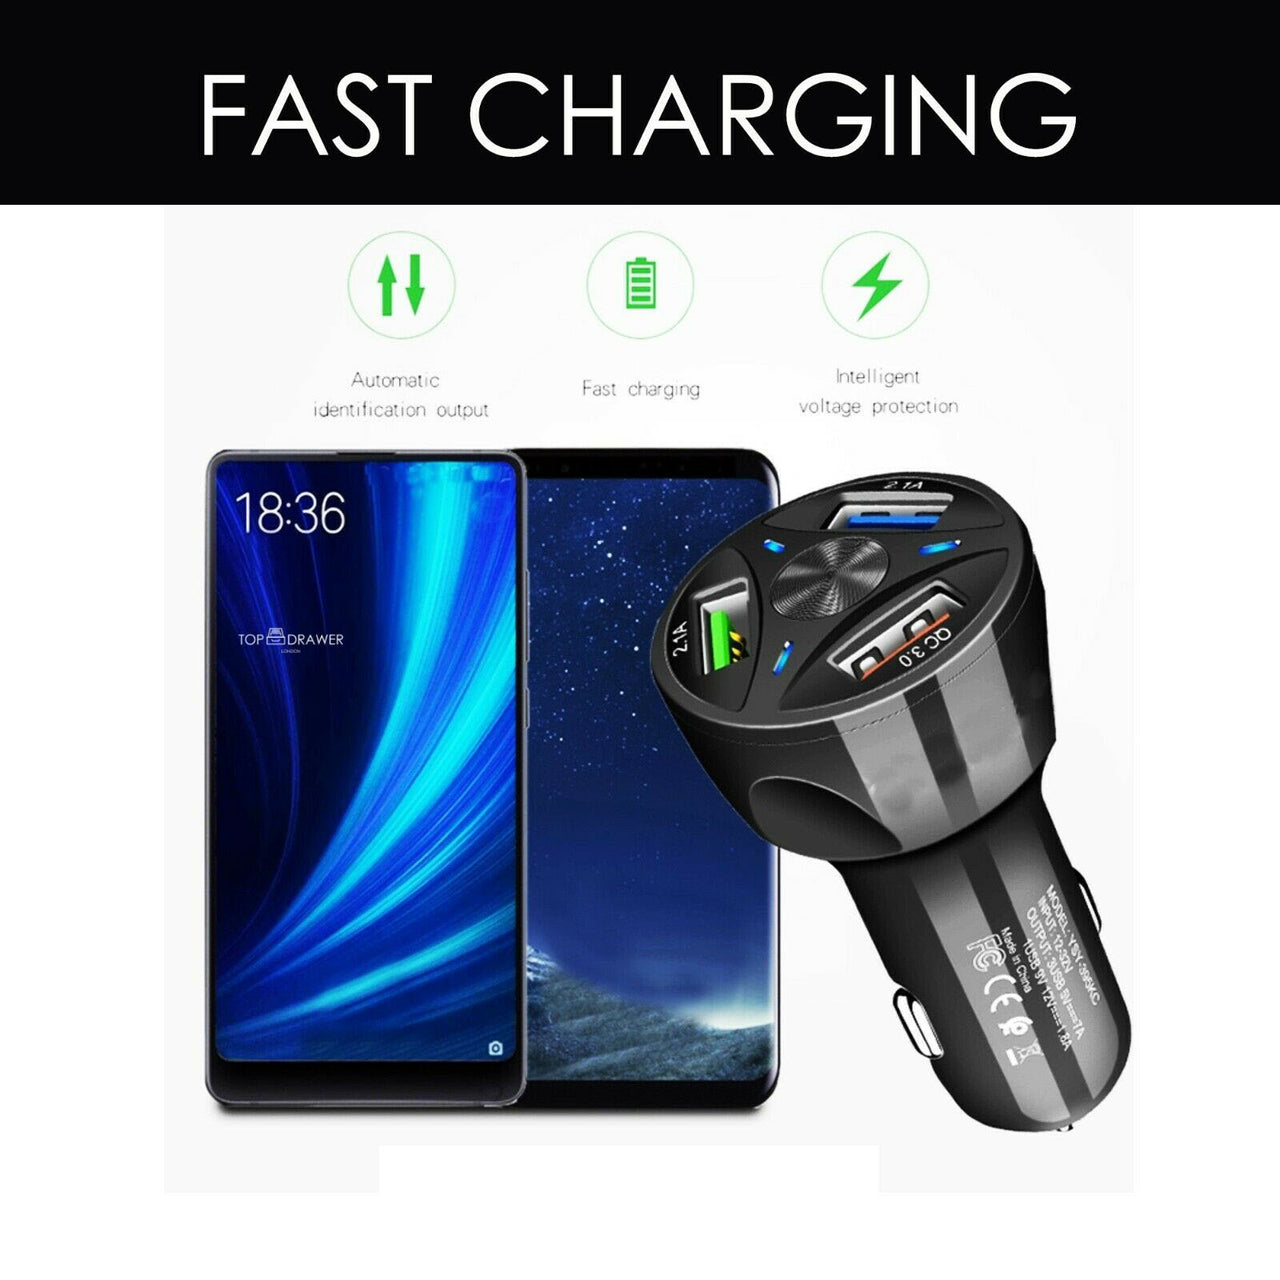 FAST CAR CHARGER 3 USB Port